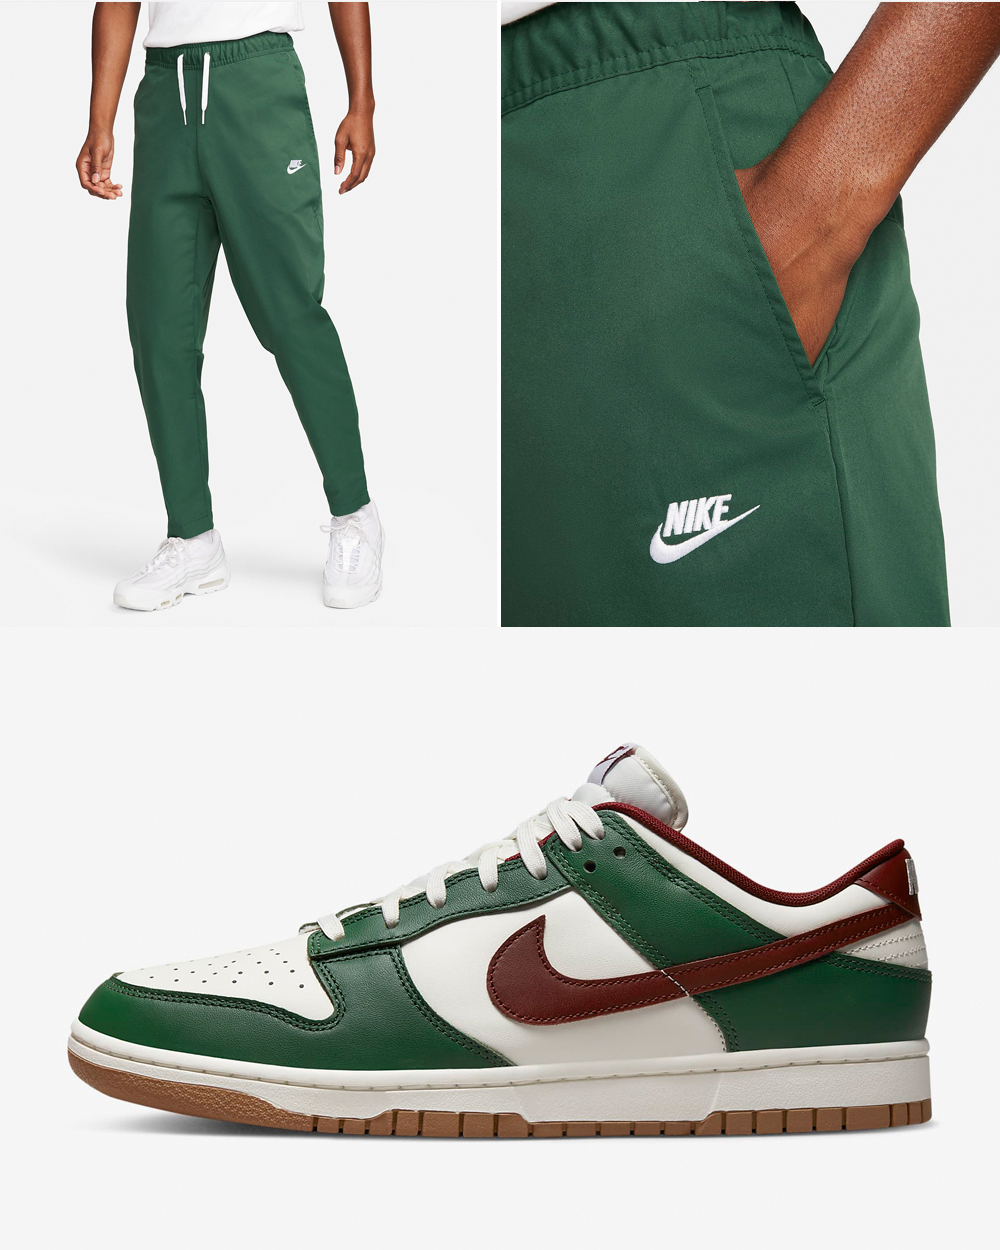 Nike Dunk Low Gorge Green Pants Outfit